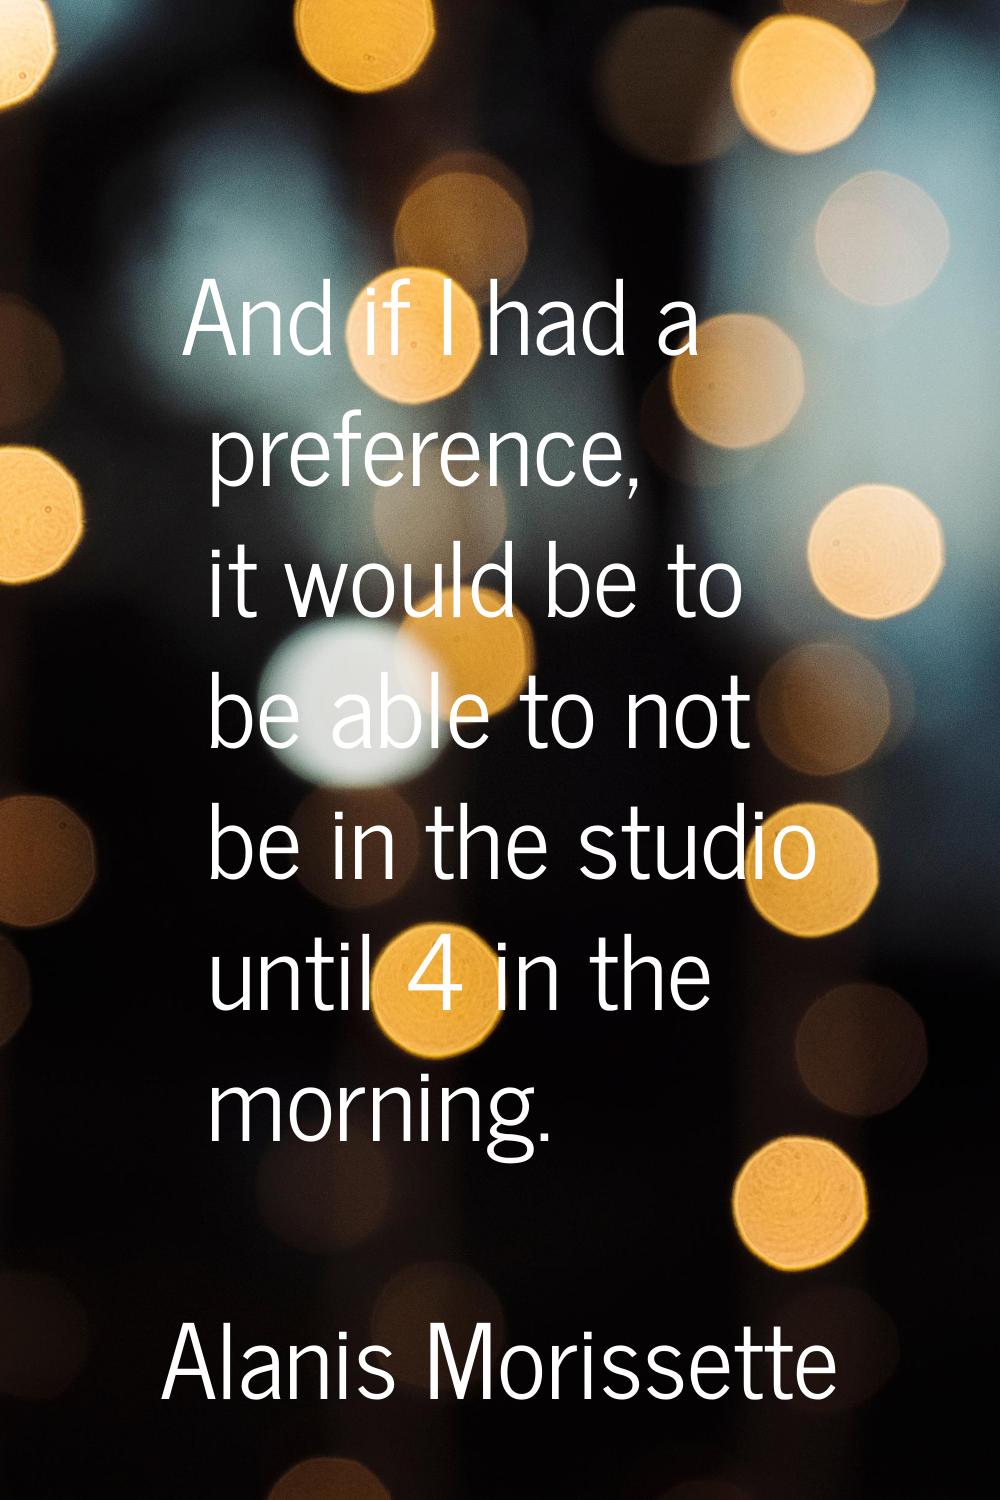 And if I had a preference, it would be to be able to not be in the studio until 4 in the morning.